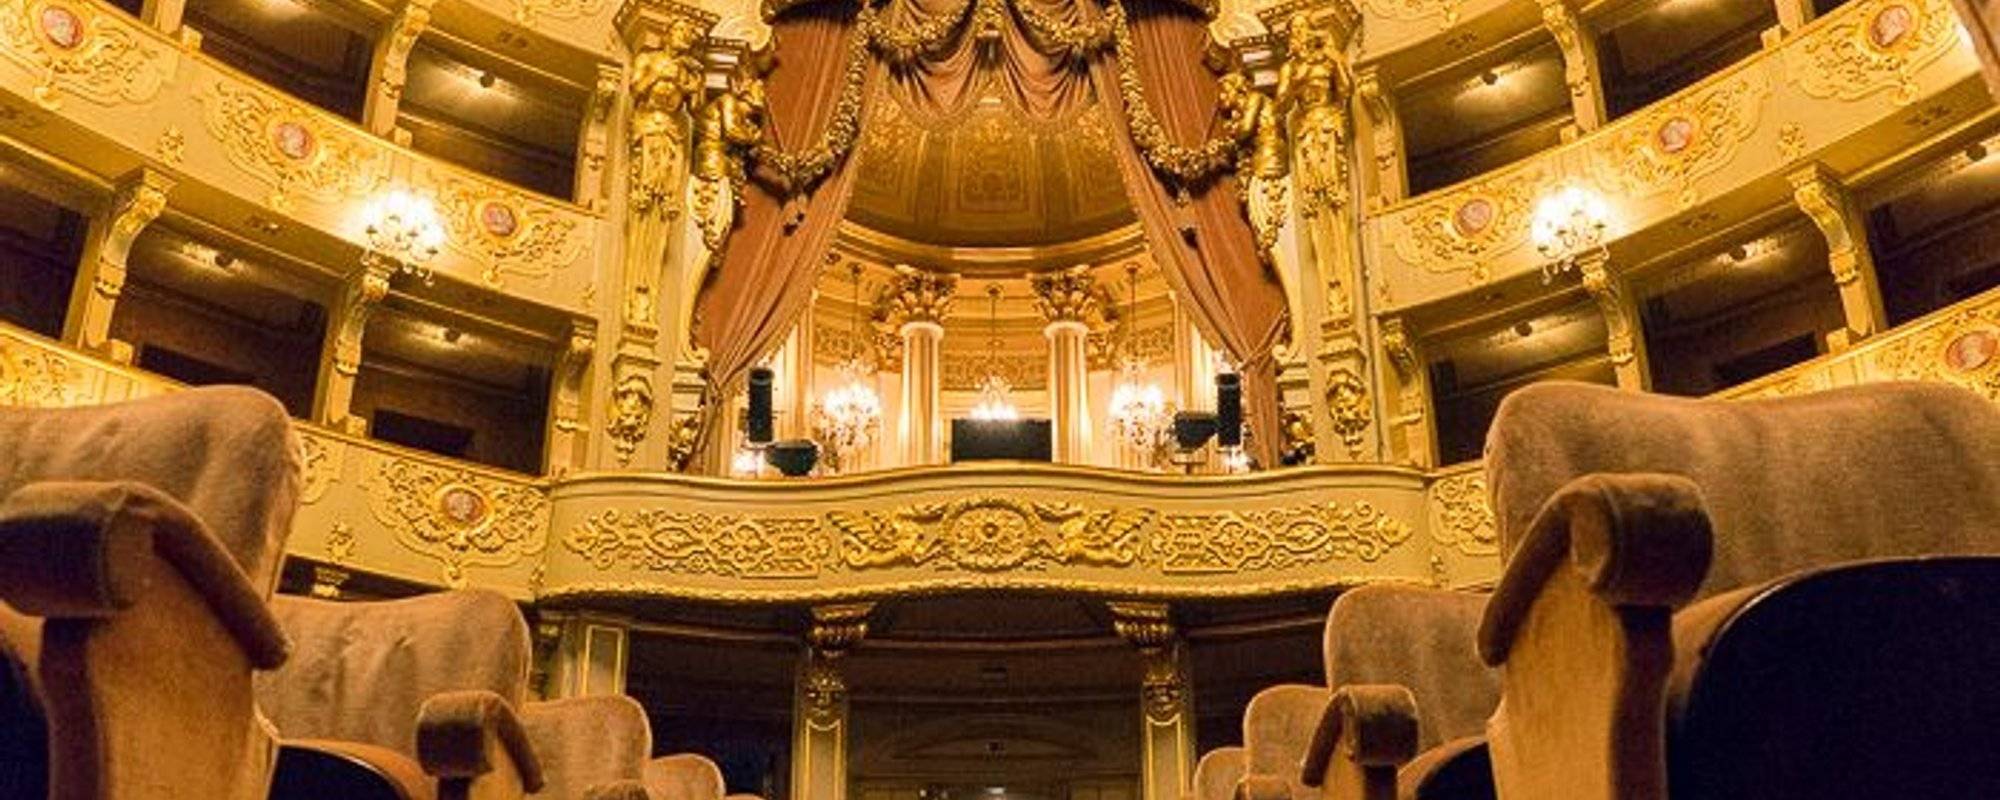 The Golden House - Lisbon’s Opera House Will Take Your Breath Away